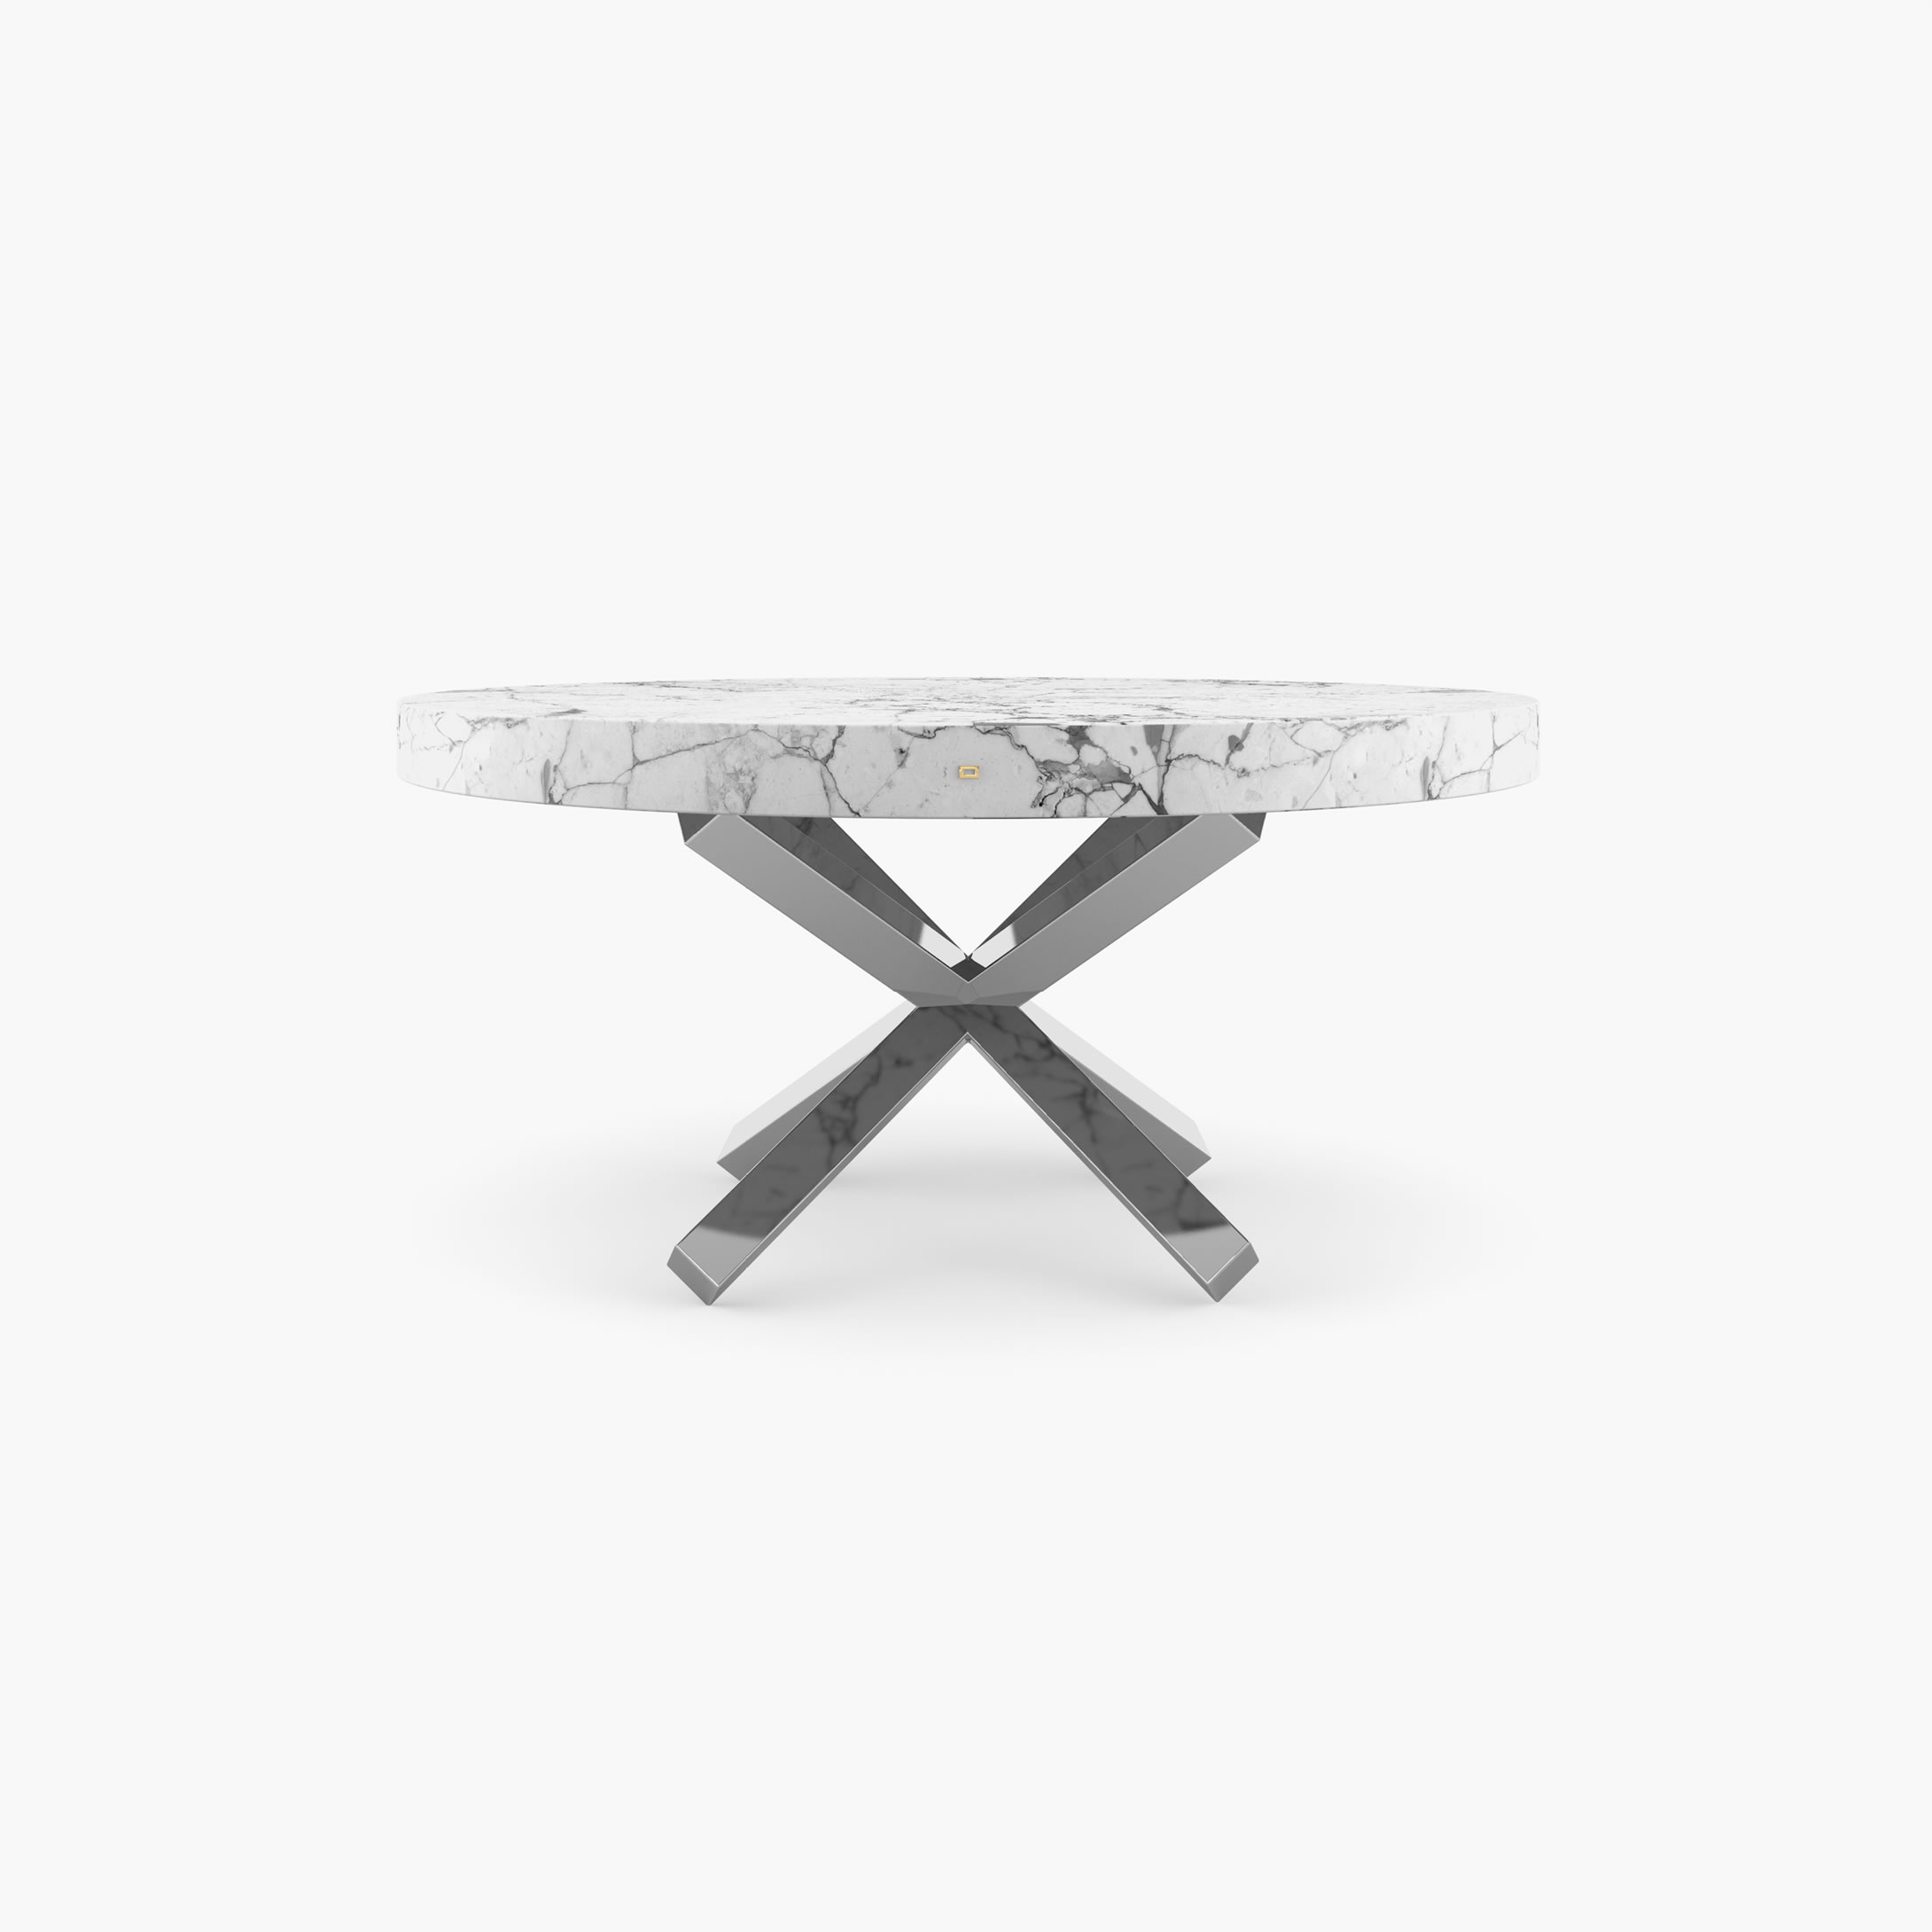 Dining Table round crossed X legs White Arabescato Marble art Dining Room art works Dining Tables FS 194 E FELIX SCHWAKE